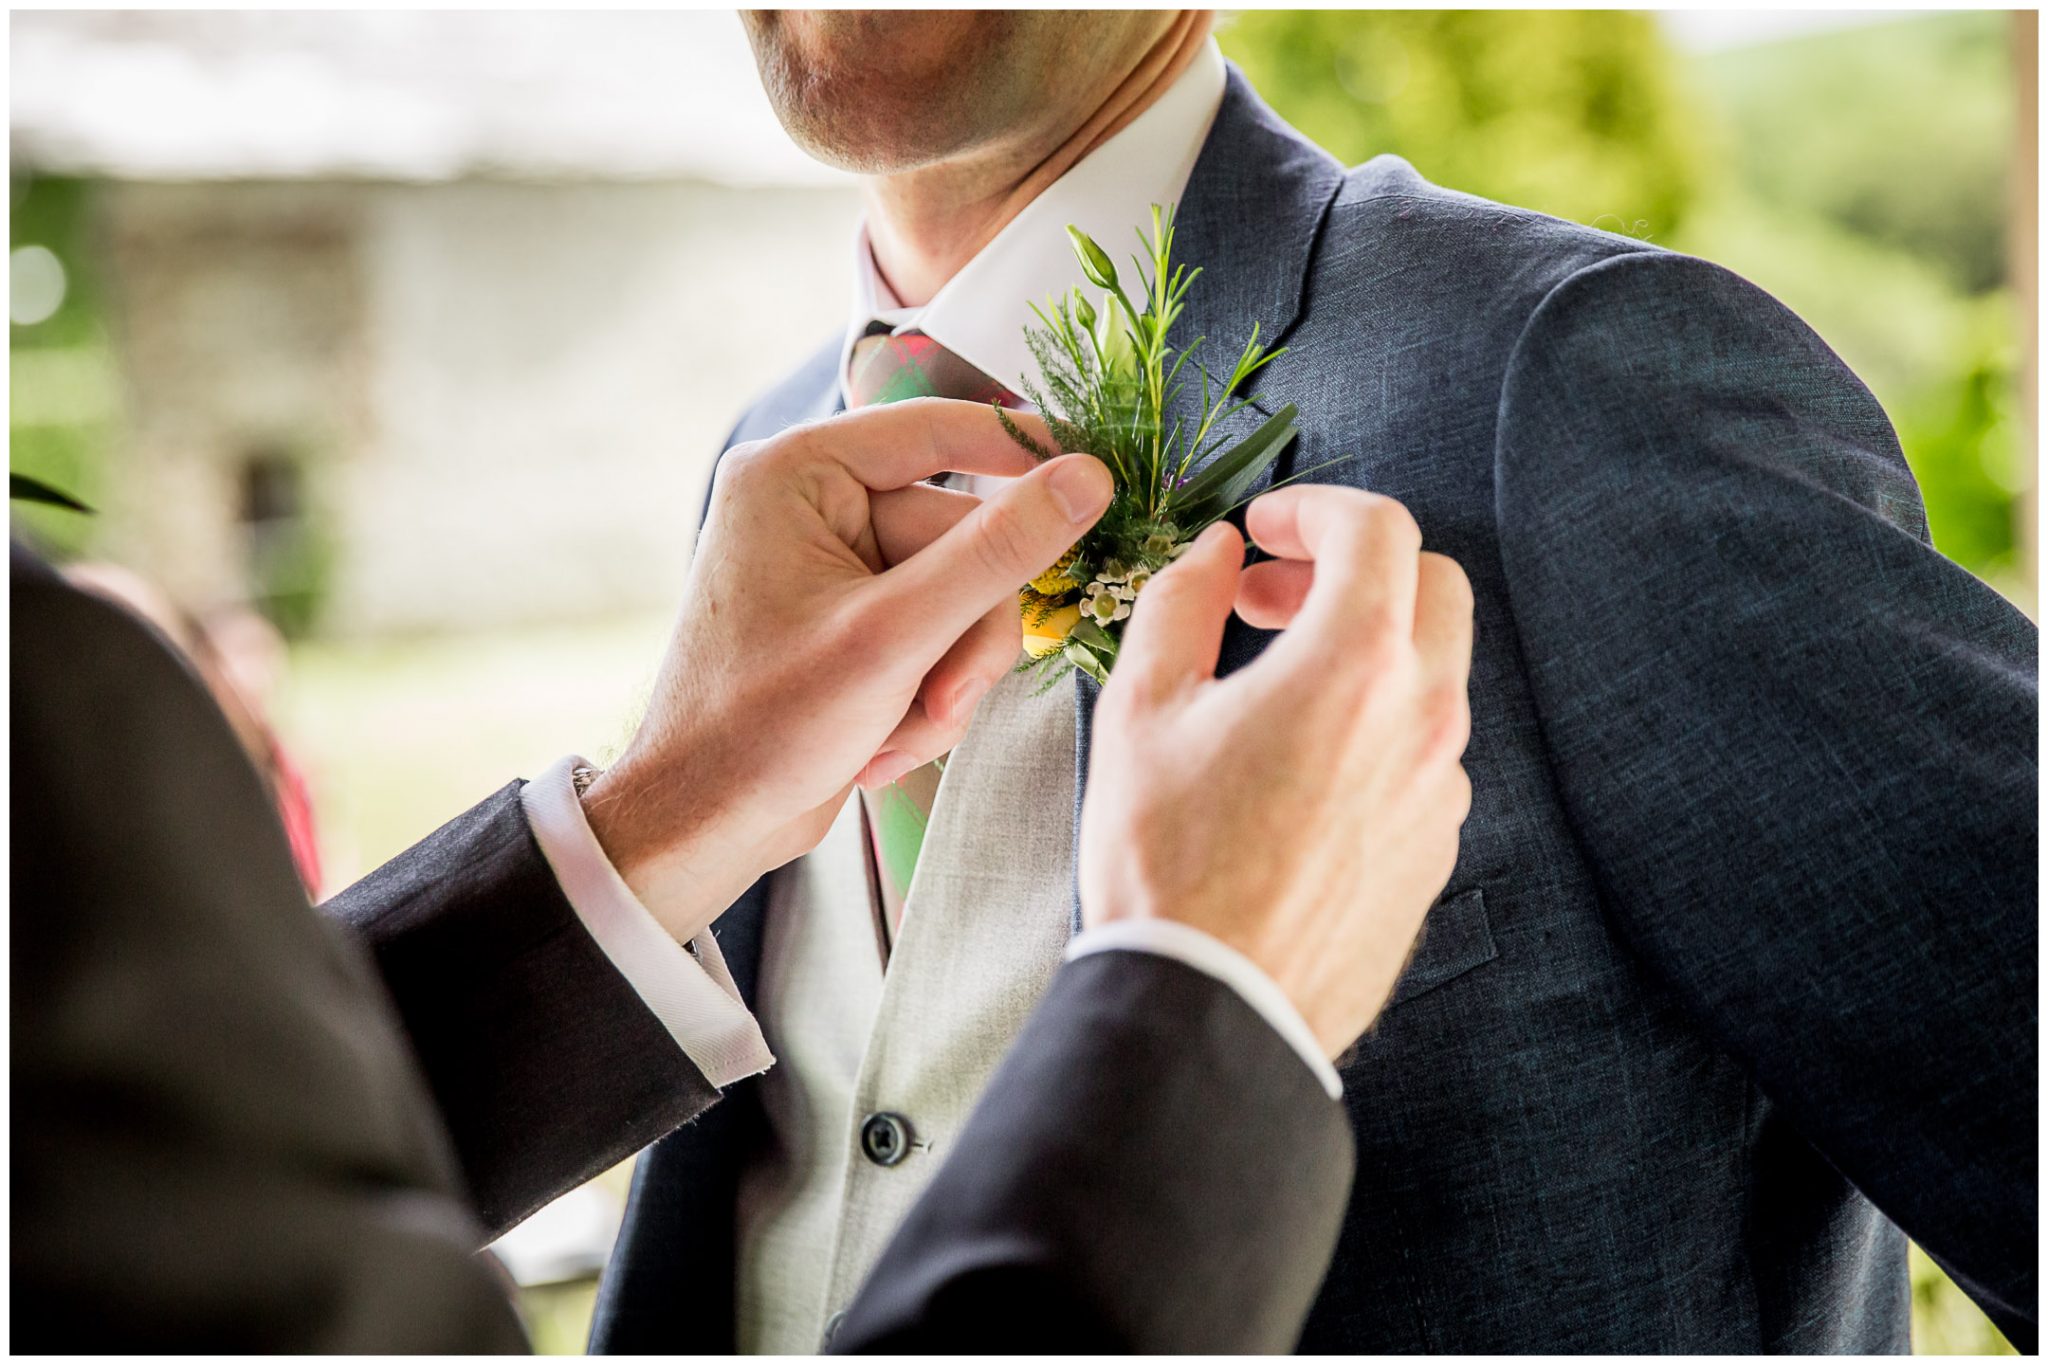 The groom's buttonhole